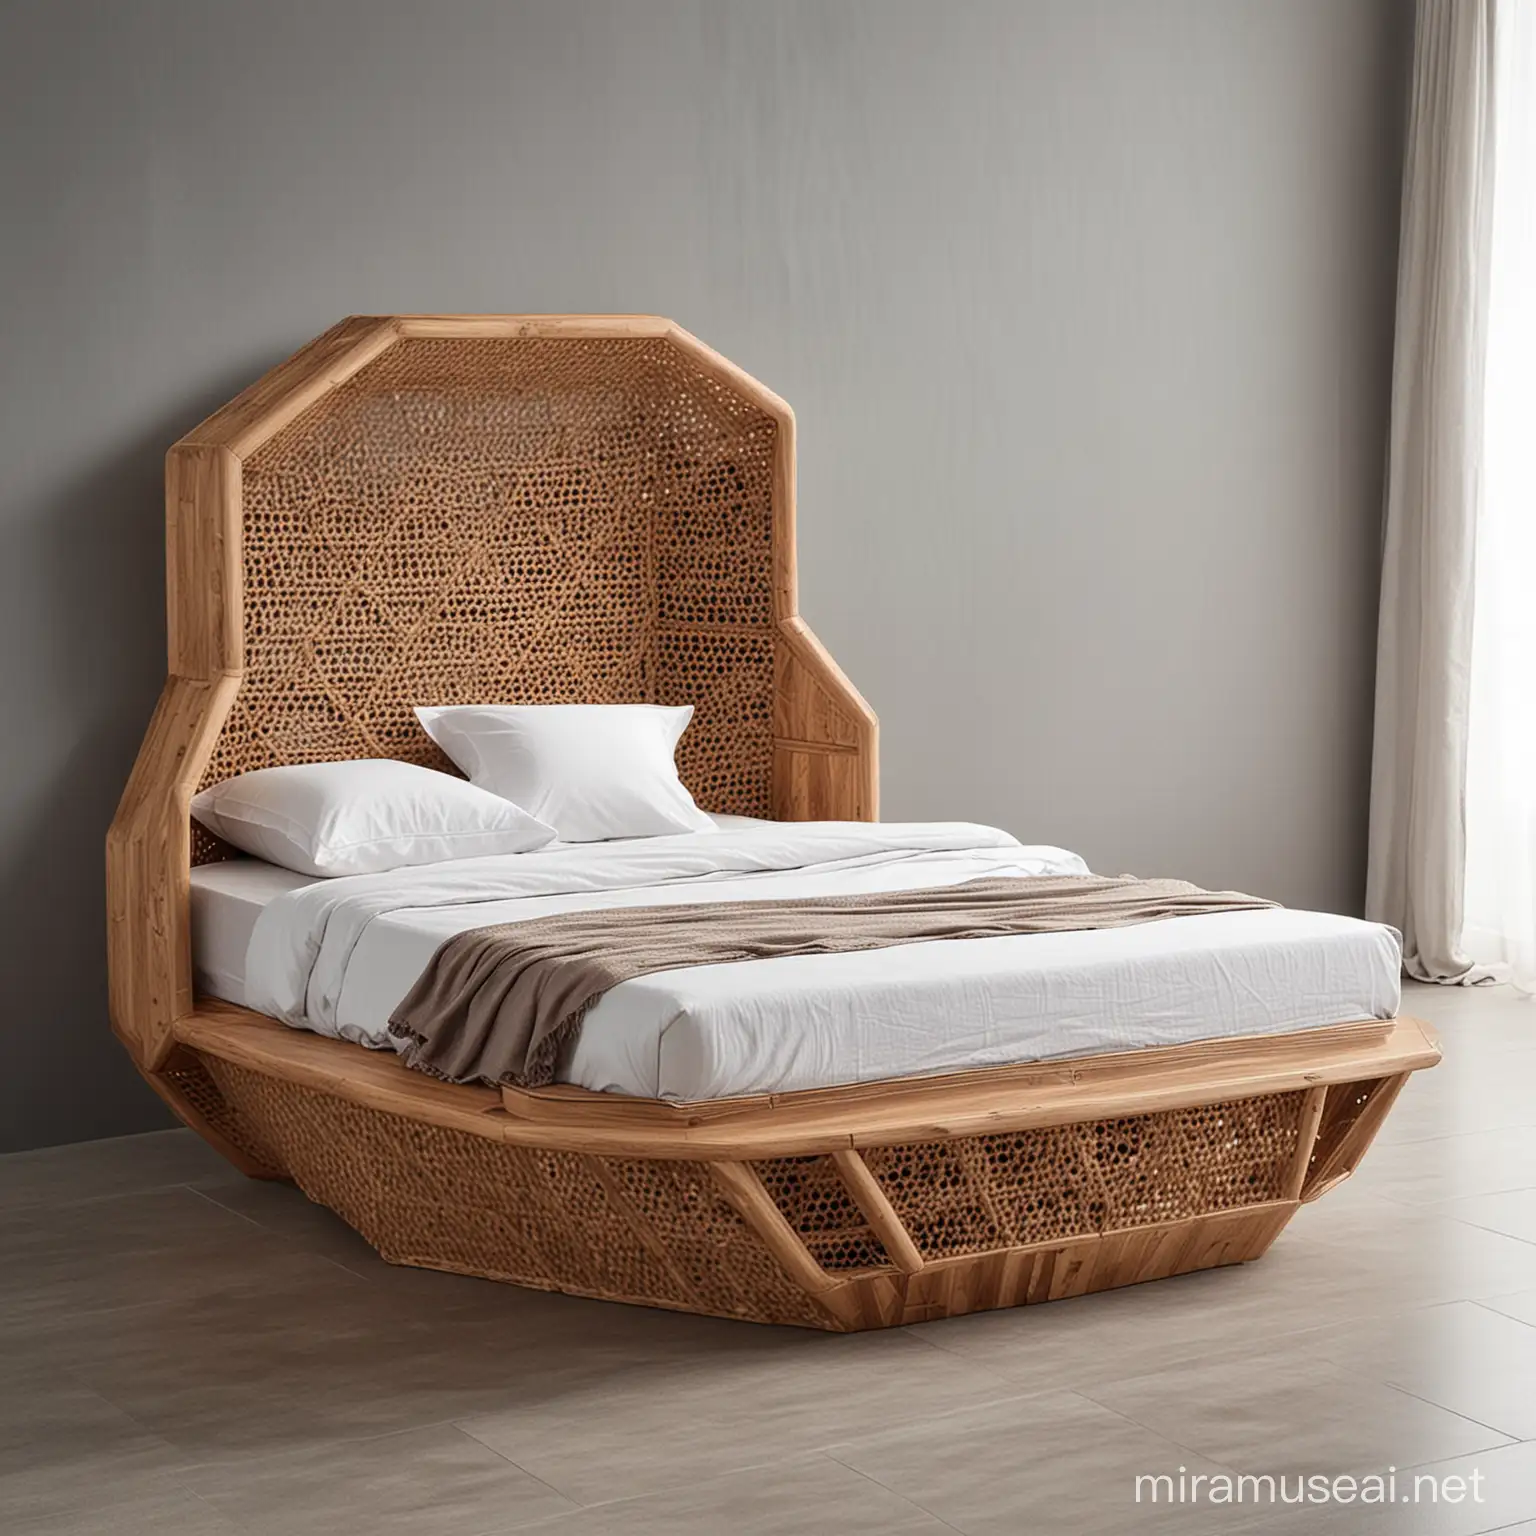 Contemporary Hexagon Rattan and Wood Single Bed Design